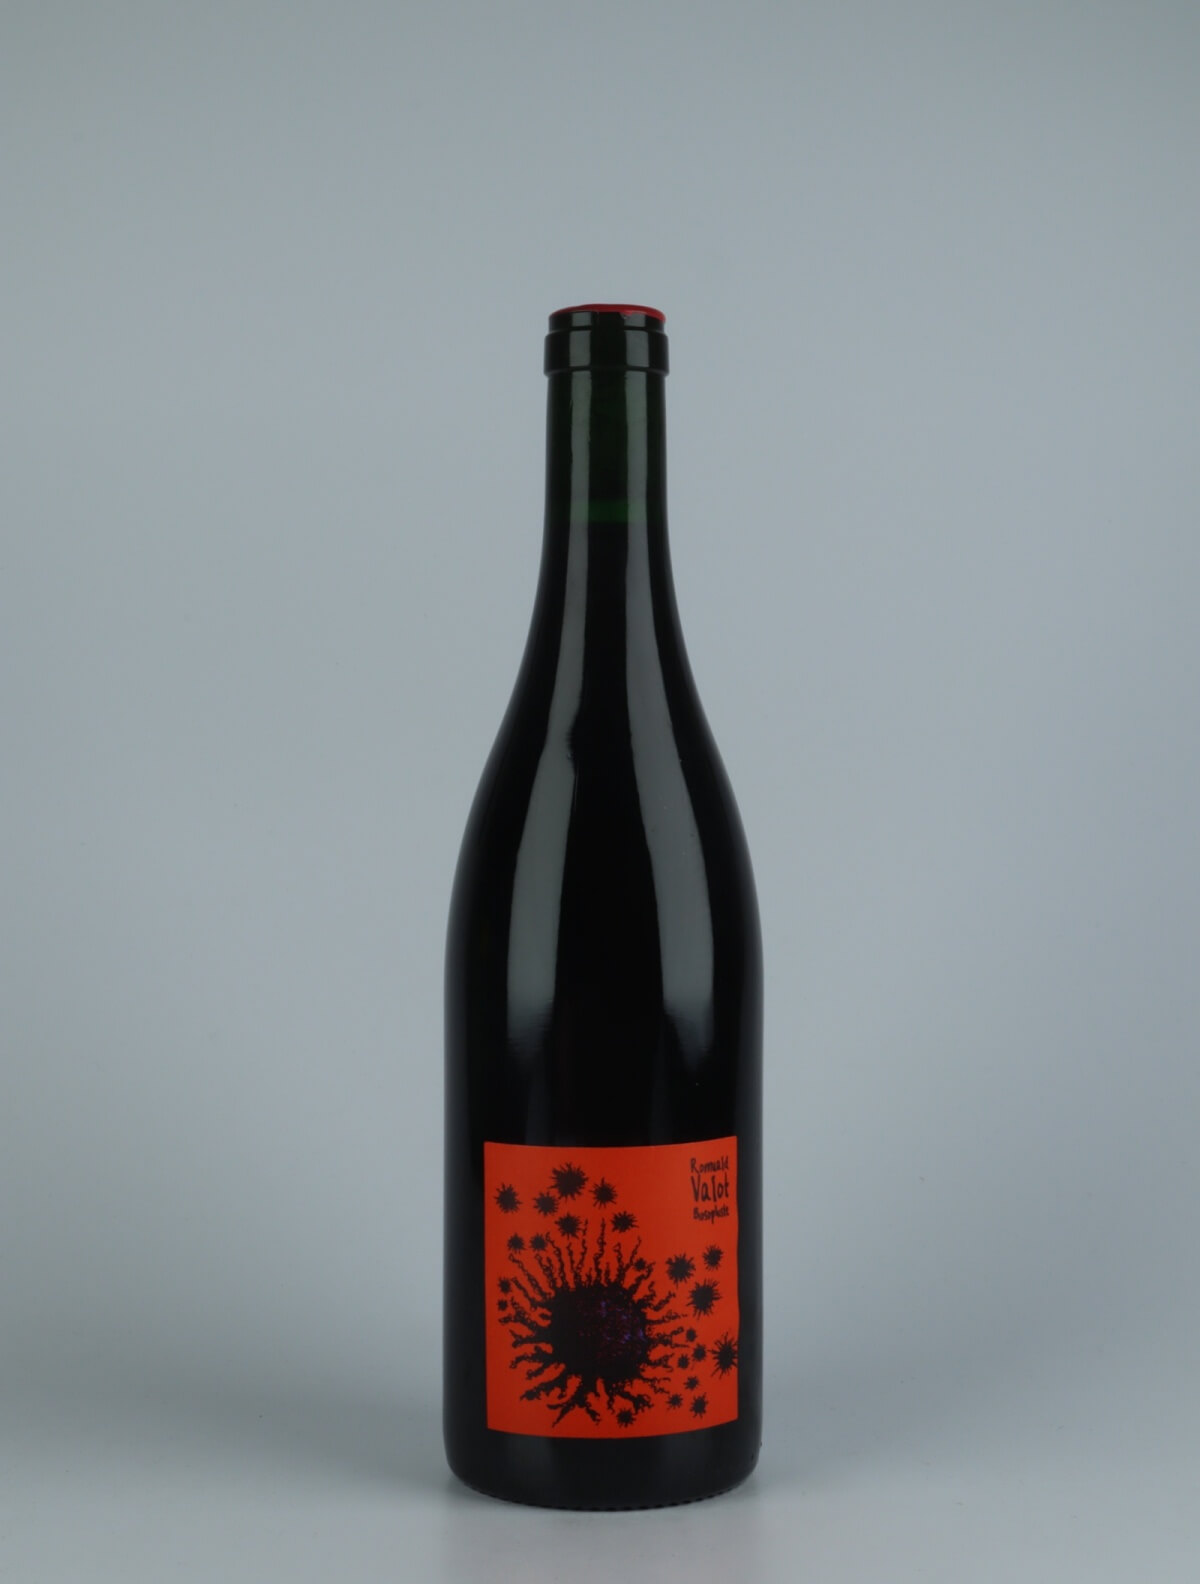 A bottle 2020 Beaujolais Villages Red wine from Romuald Valot, Beaujolais in France